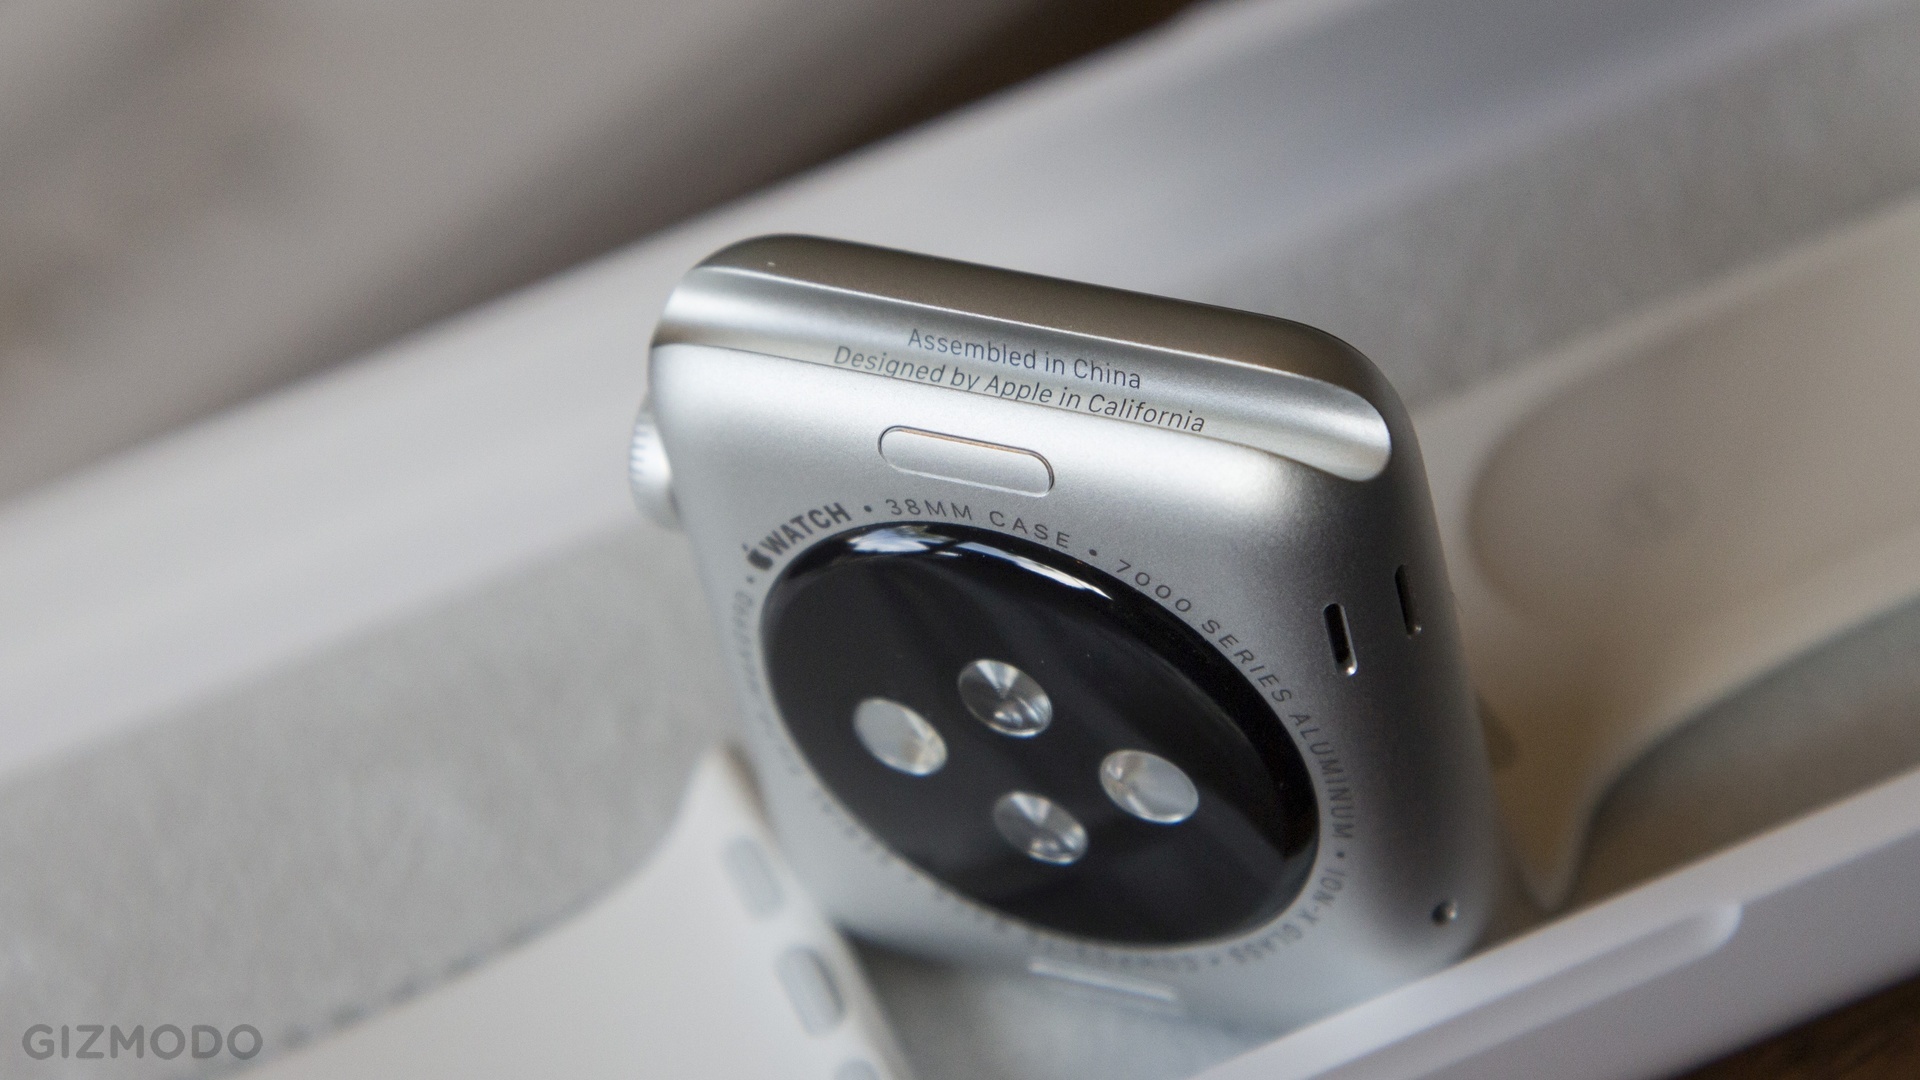 I Beta-Tested The Apple Watch So You Don’t Have To